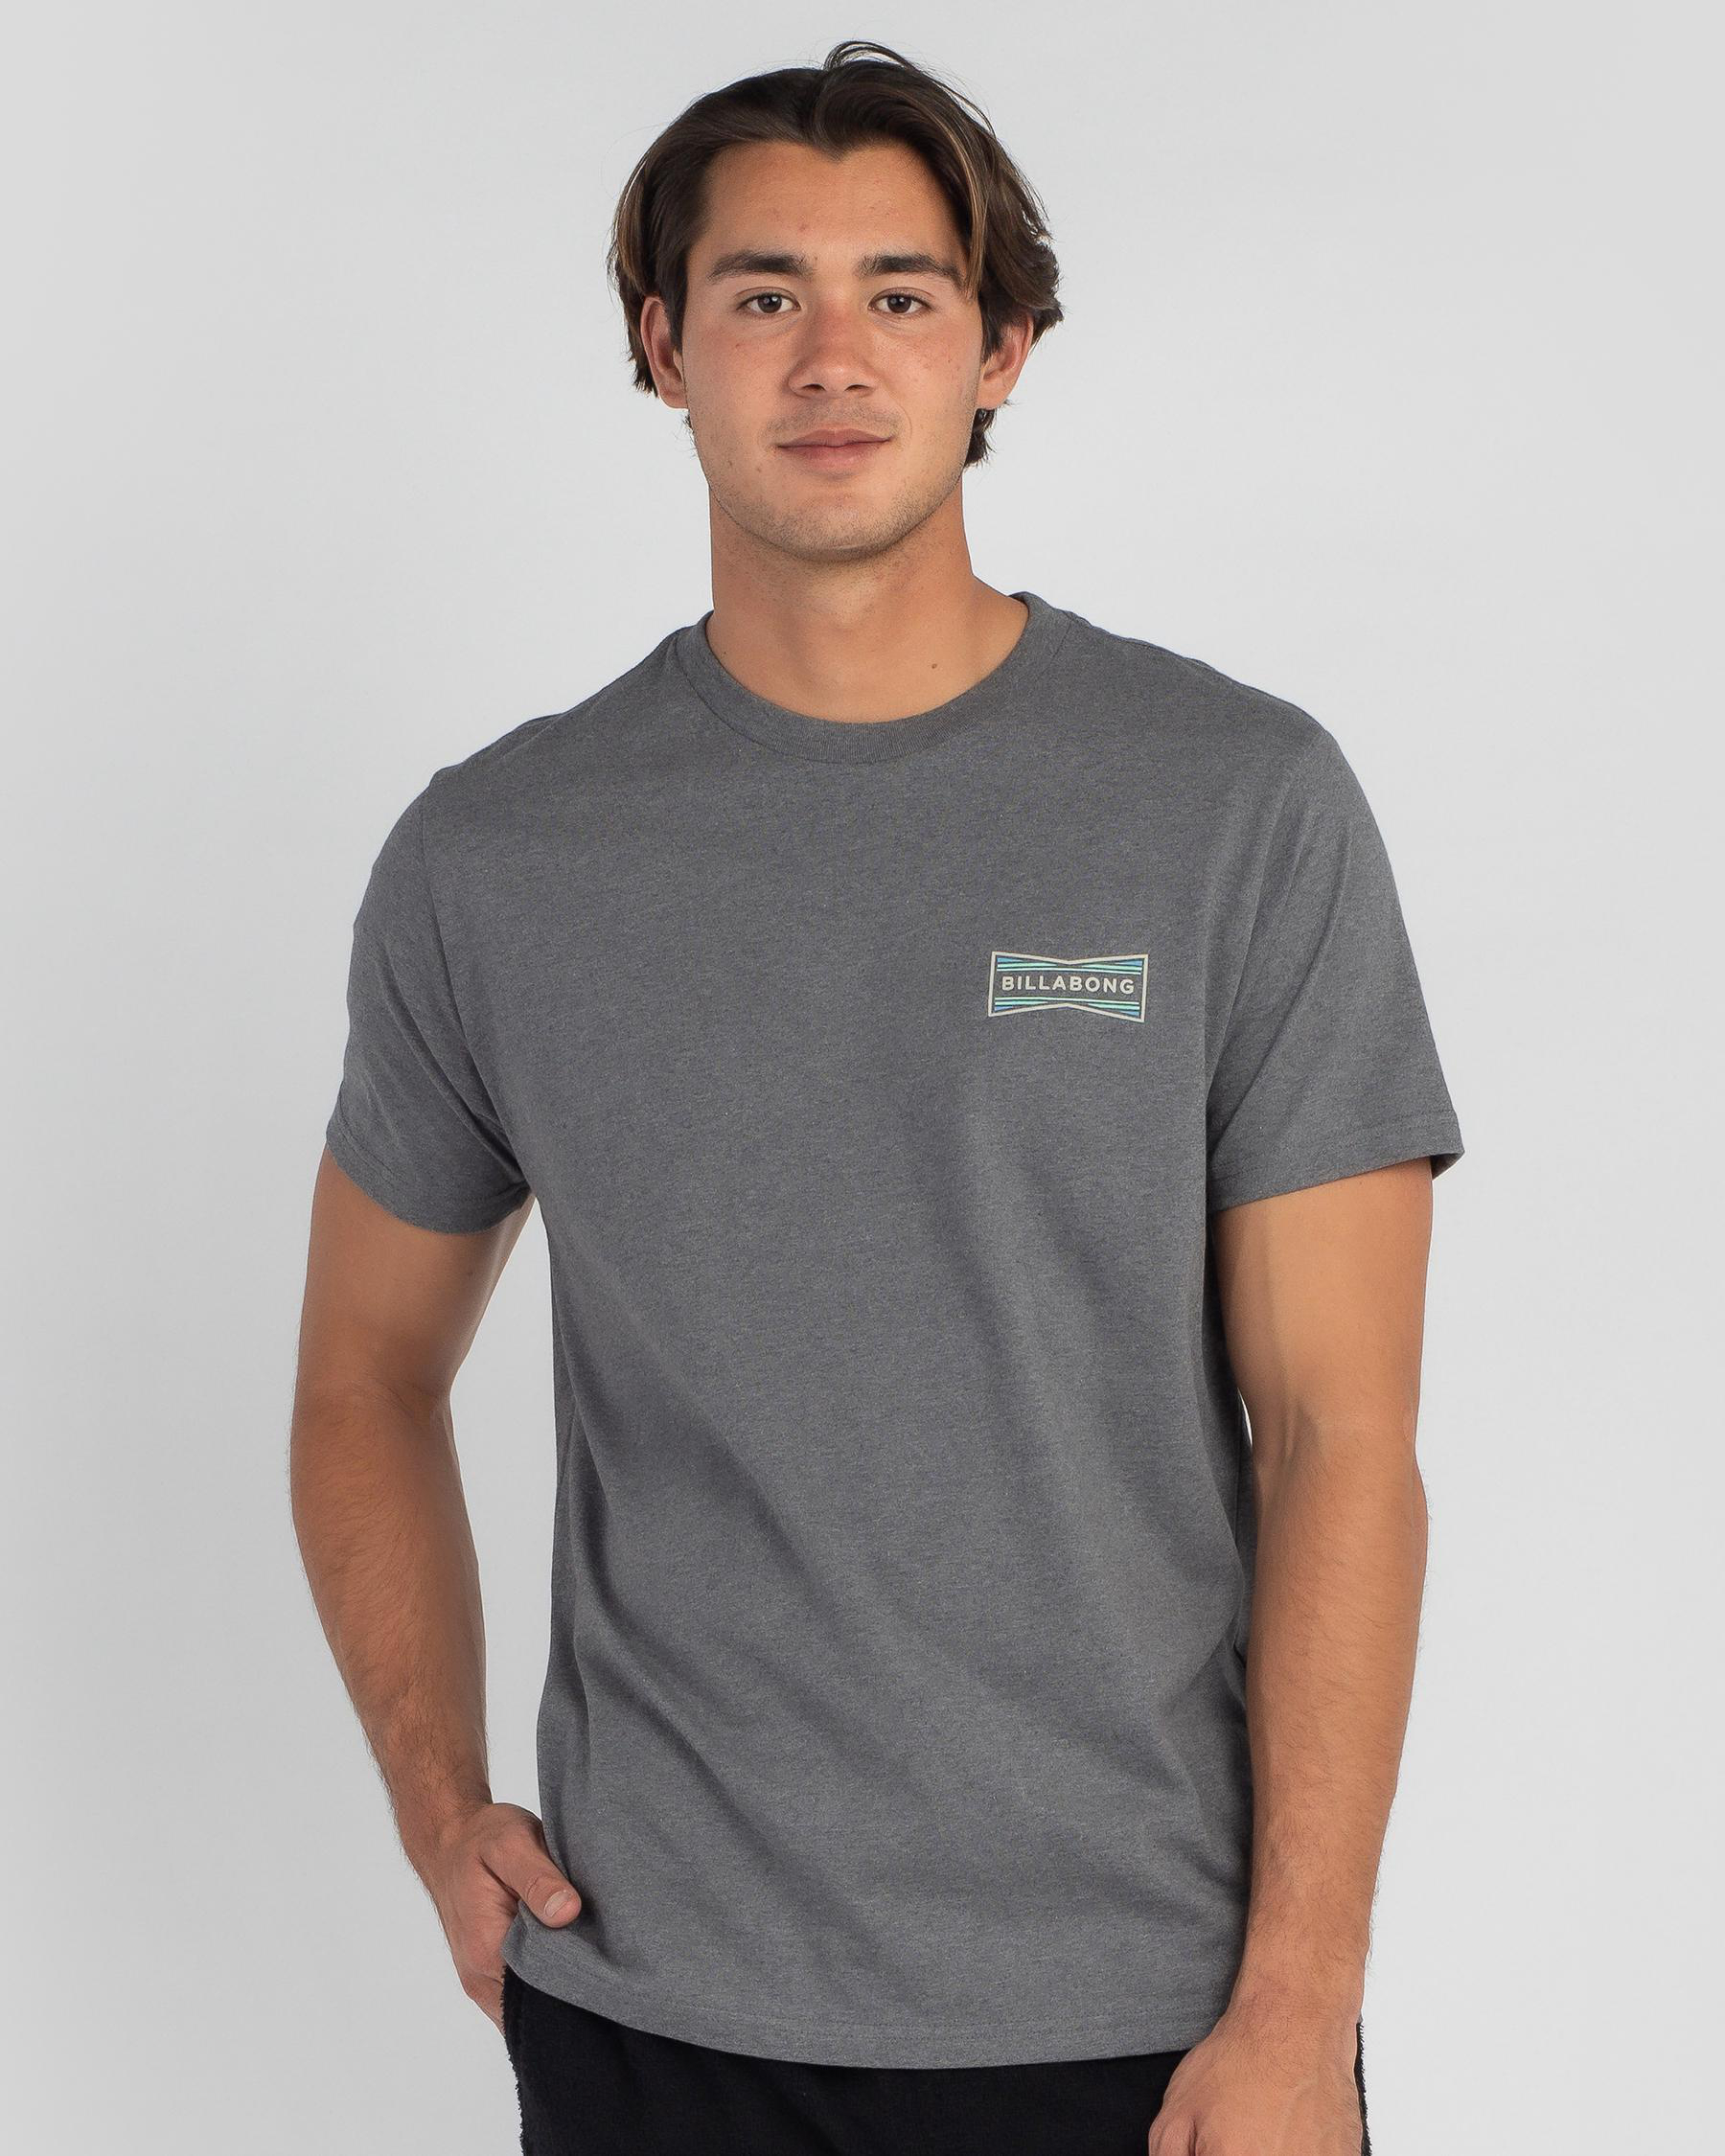 Billabong Pacifico T-Shirt In Dark Grey Heather - Fast Shipping & Easy ...